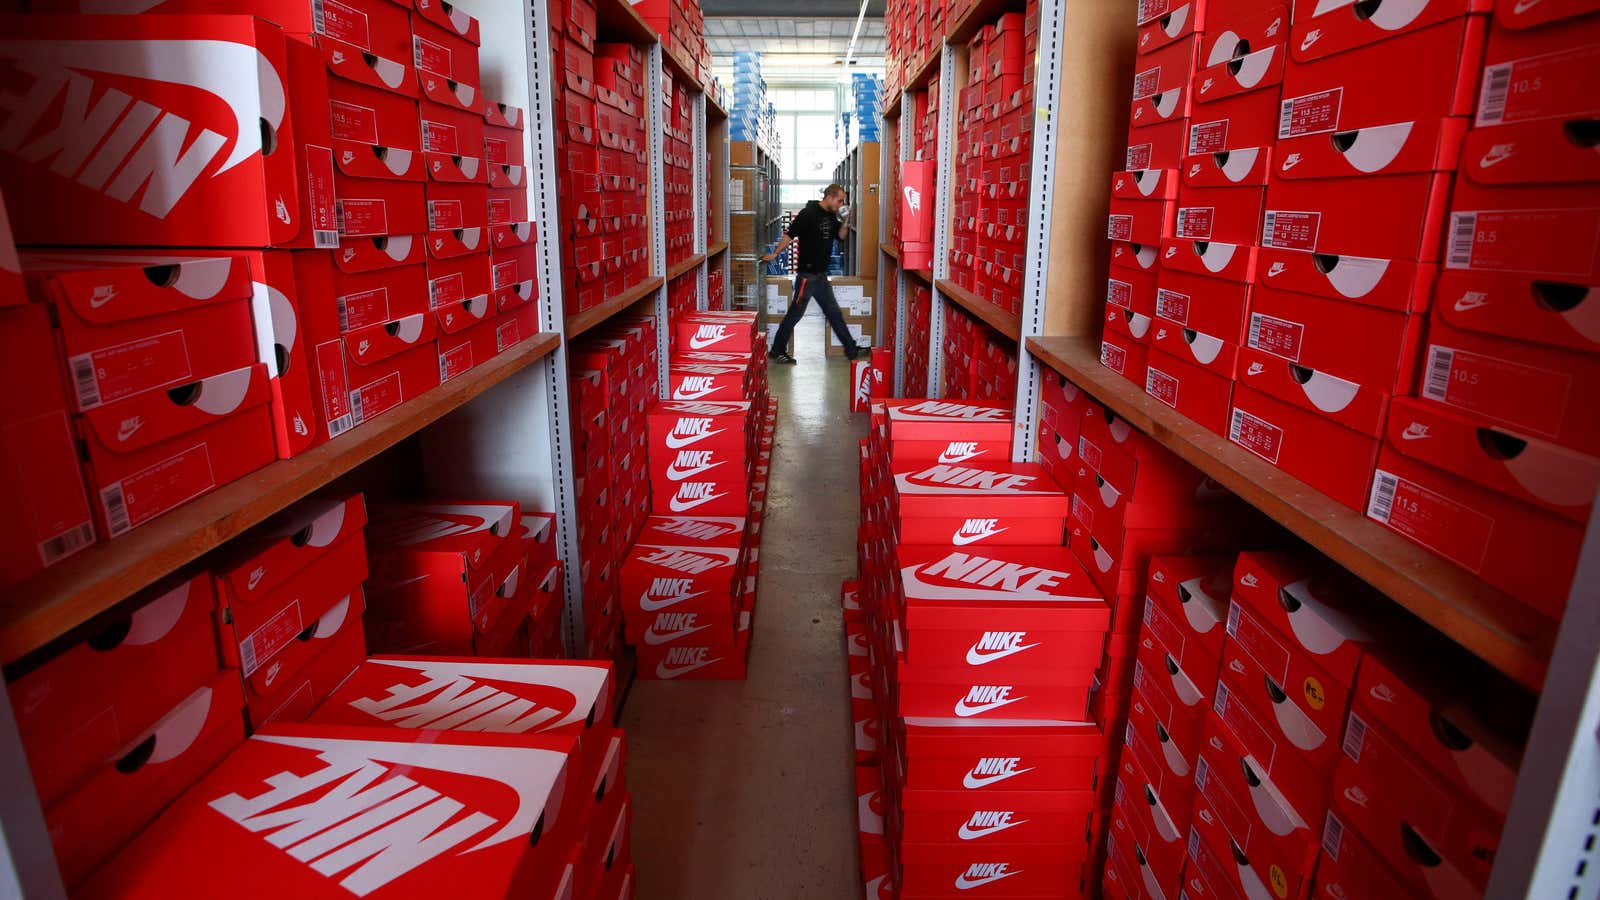 Nike is rebalancing the share of its business from direct-to-consumer and wholesale sales.